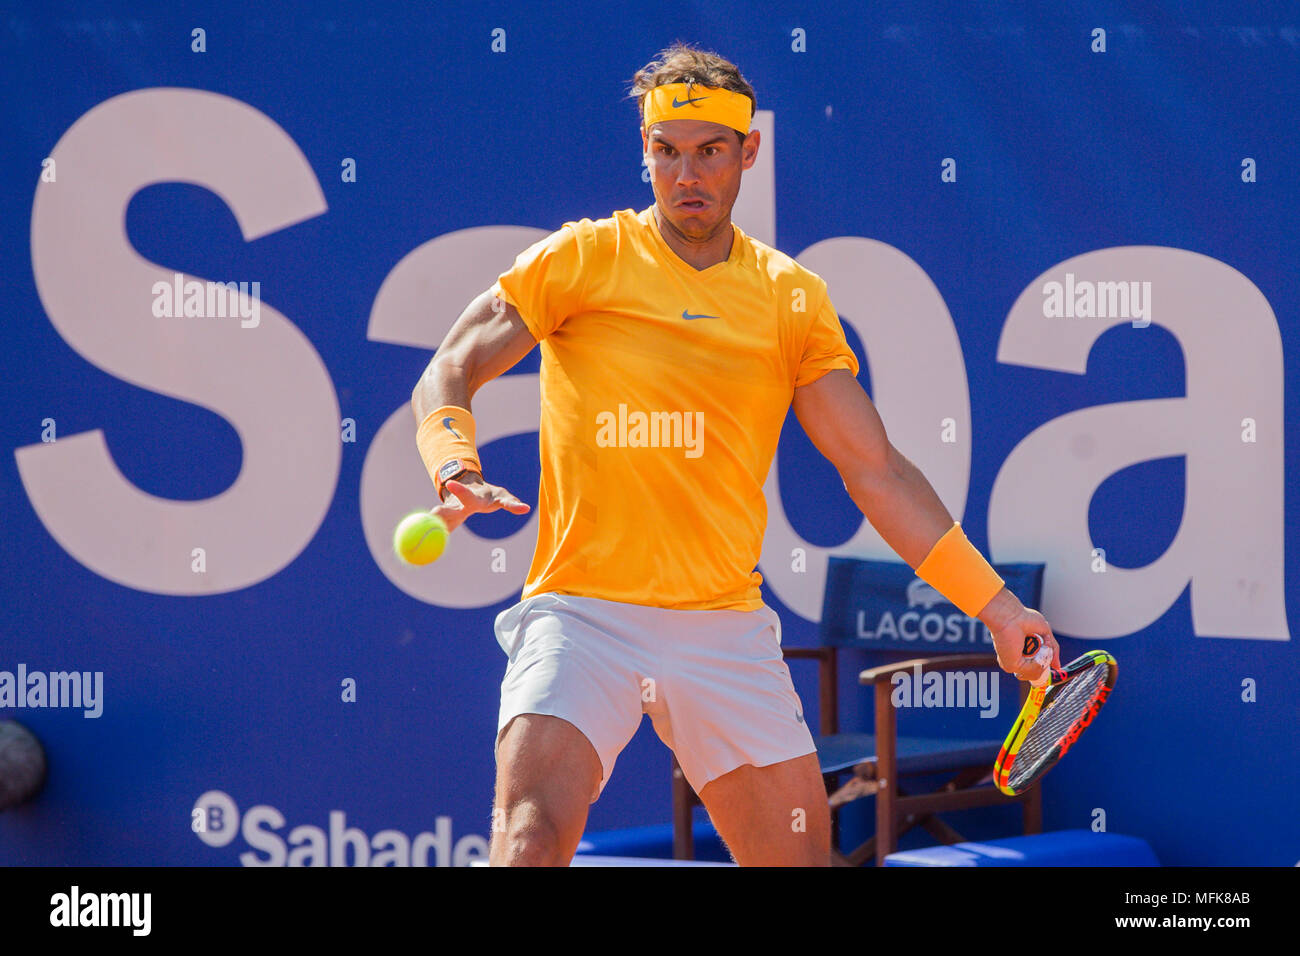 Rafa Nadal during the match against Guillermo Garcia-Lopez at the Barcelona Open Banc Sabadell 2018, on 26th April 2018 in Barcelona, Spain. (Mikel TriguerosUrbanandsportCordonPress) Stock Photo